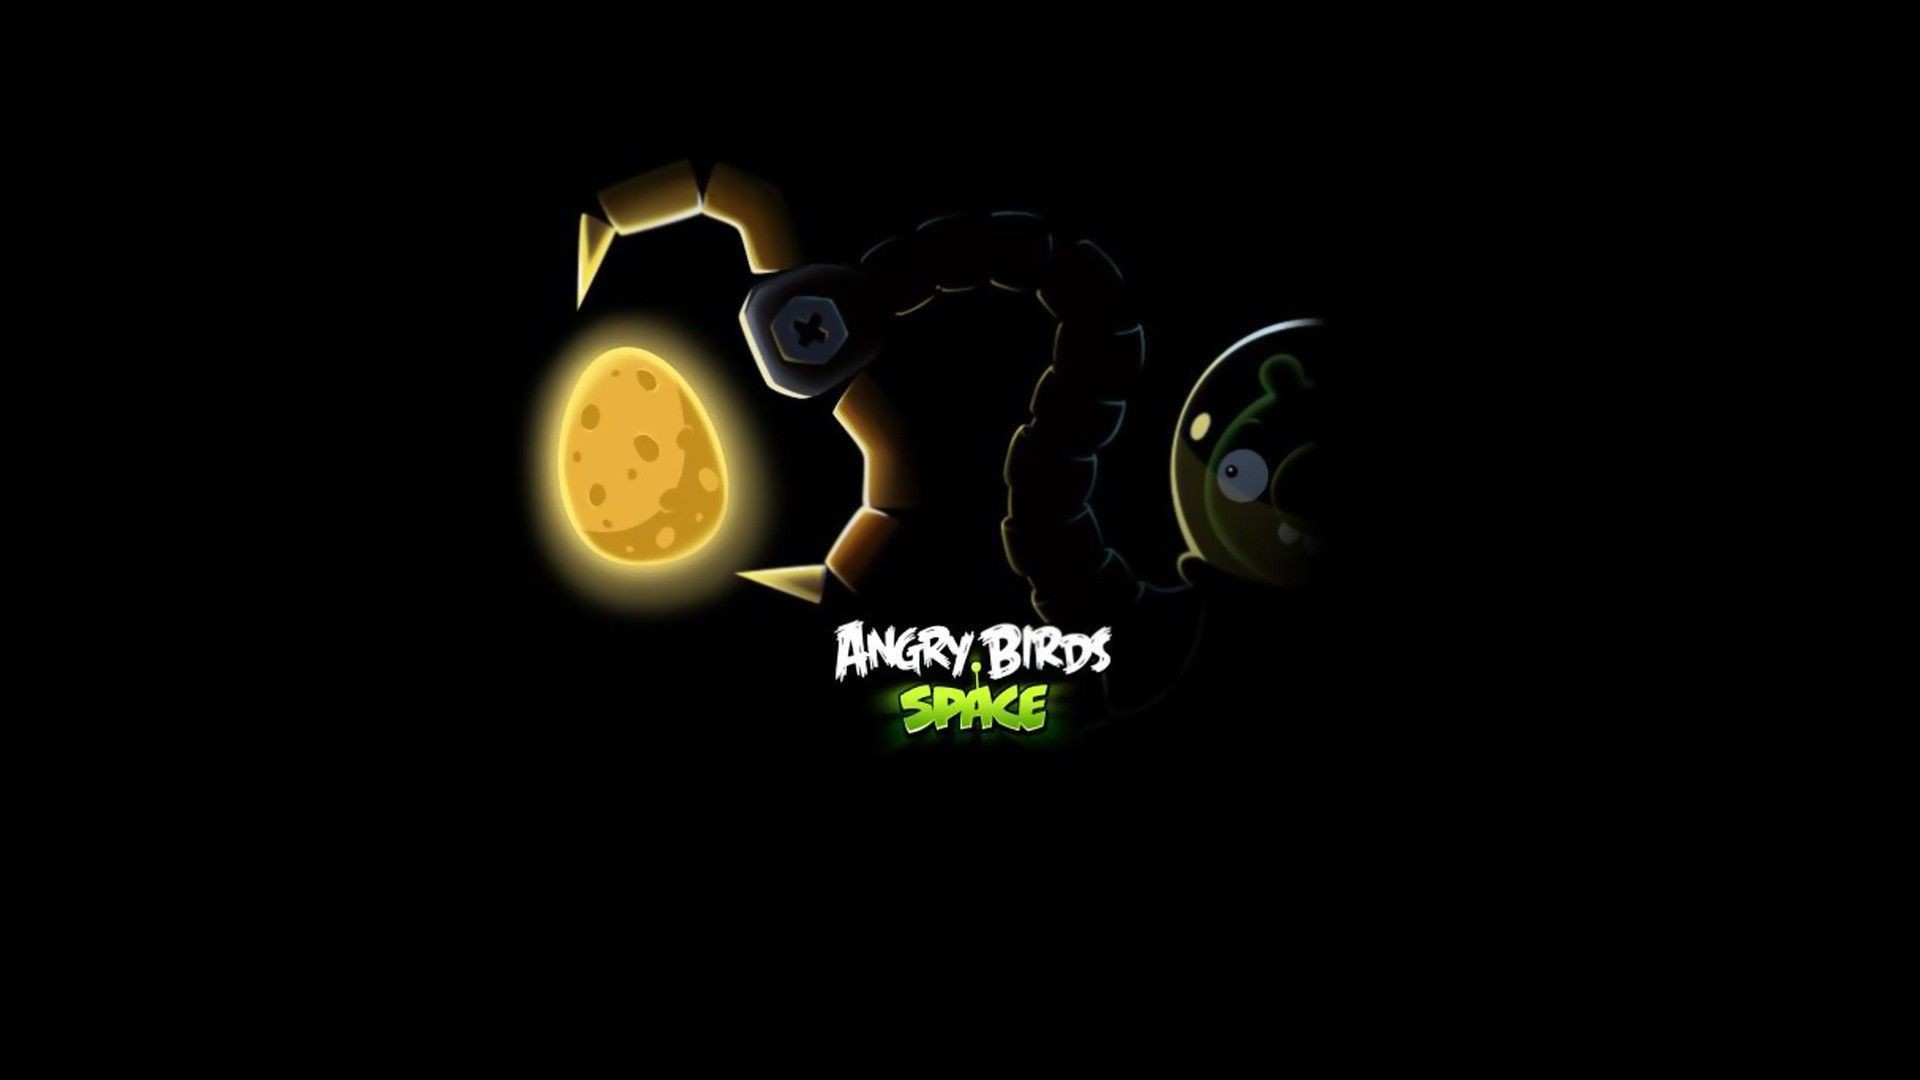 General 1920x1080 Angry Birds Angry Birds Space dark simple background black background video game characters